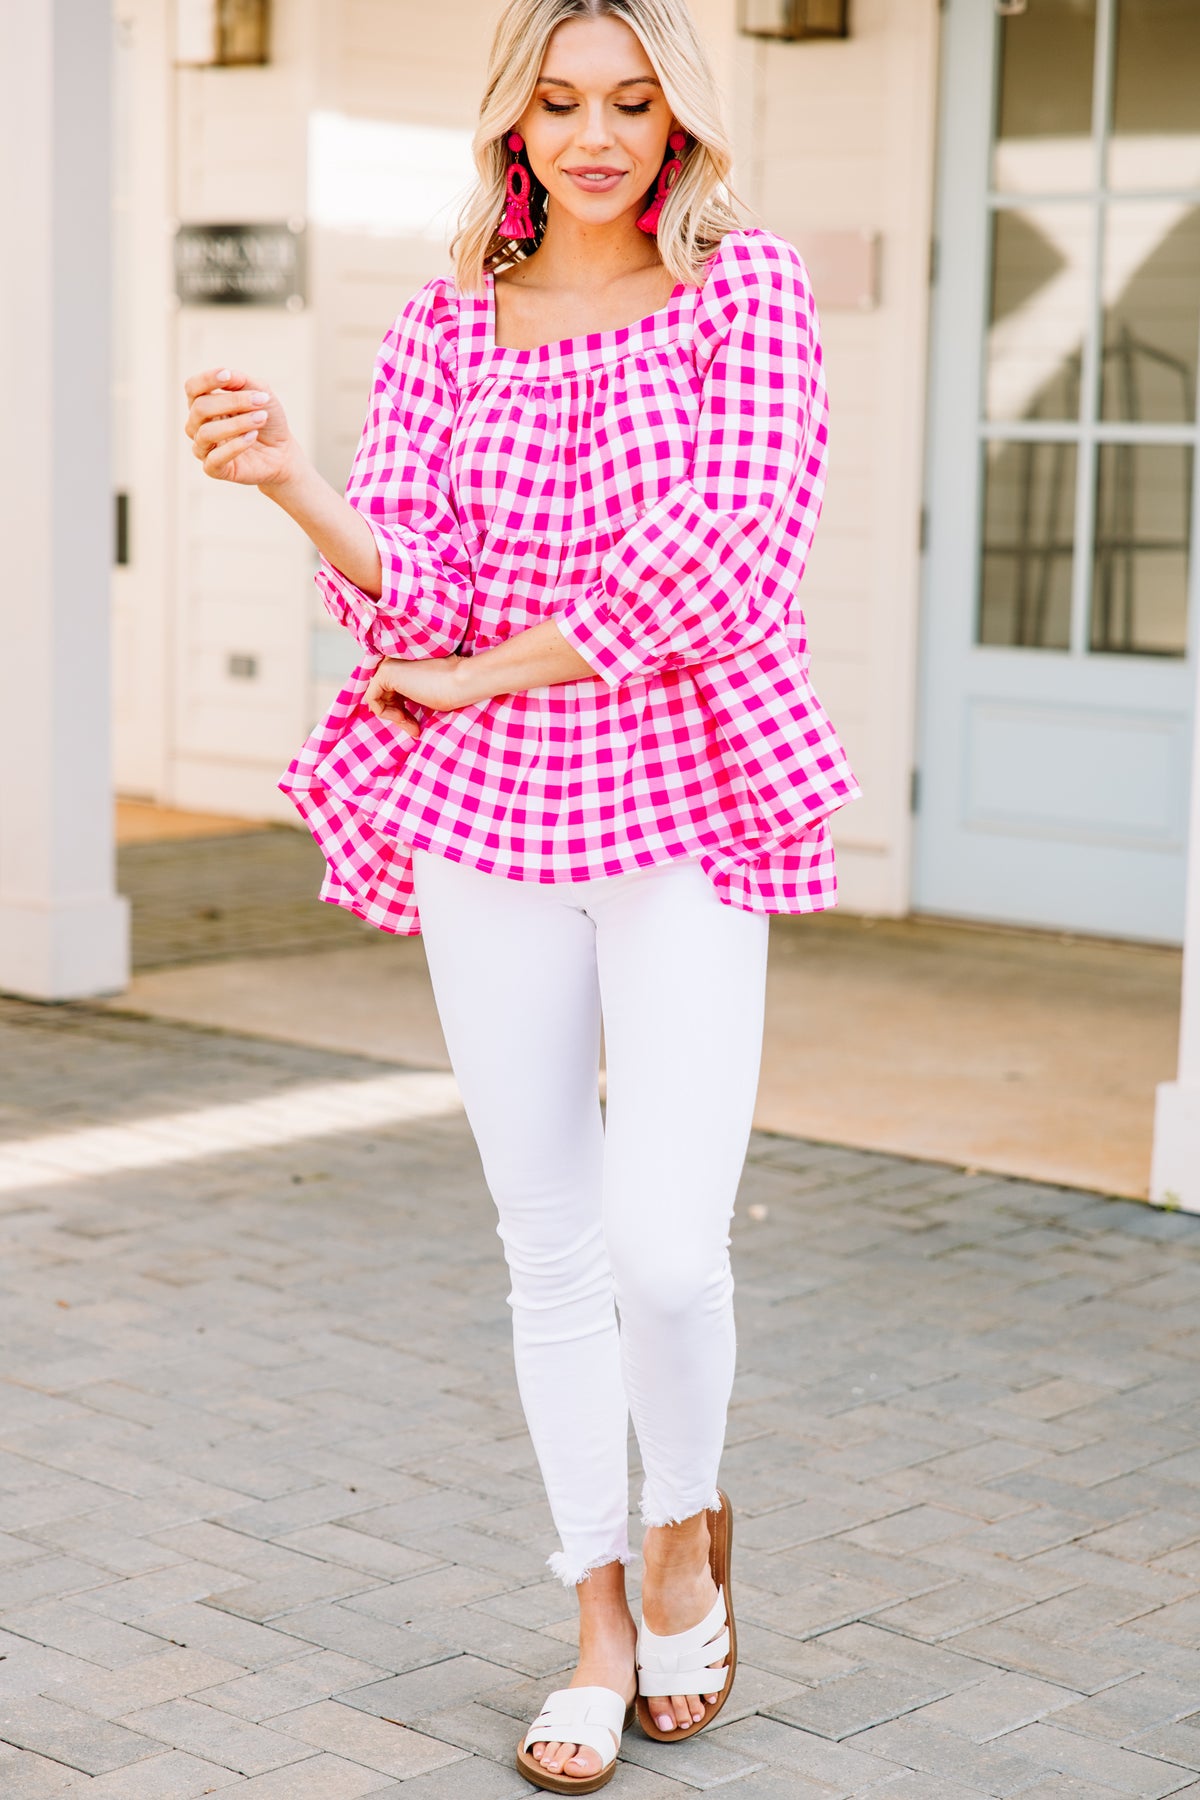 Feeling Fun Hot Pink Gingham Blouse – Shop the Mint